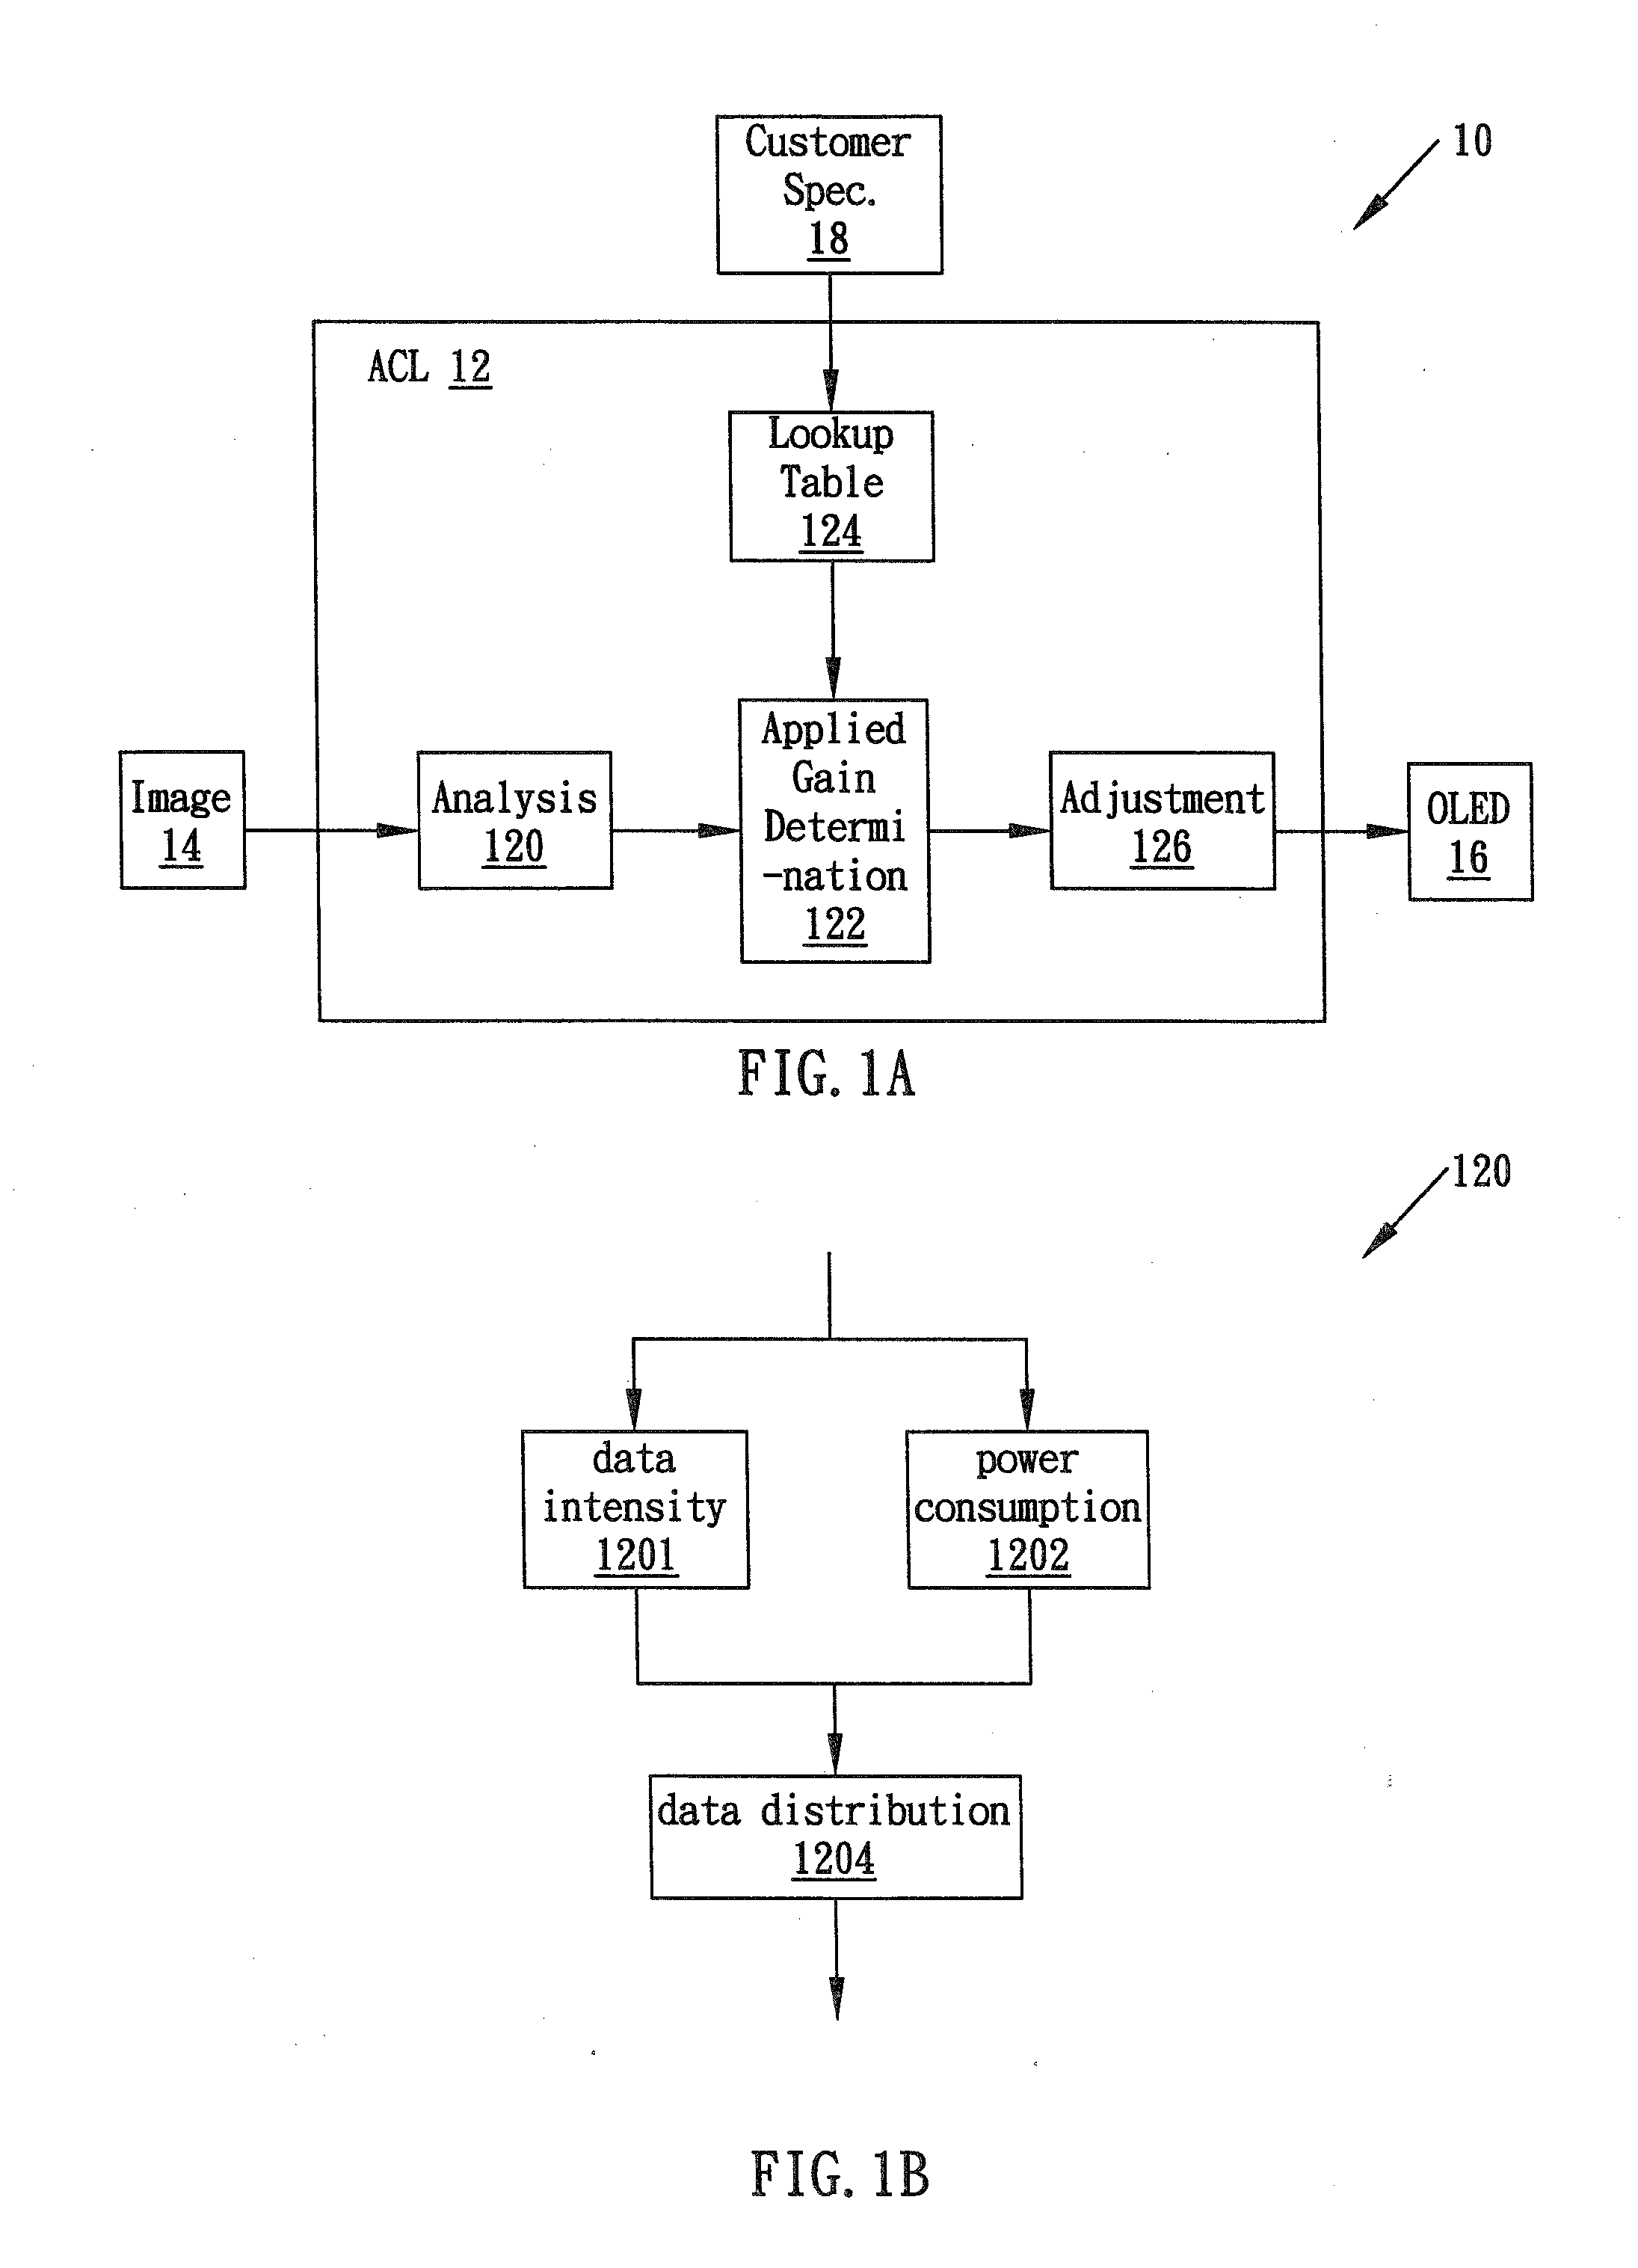 Content-adaptive adjustment system and method